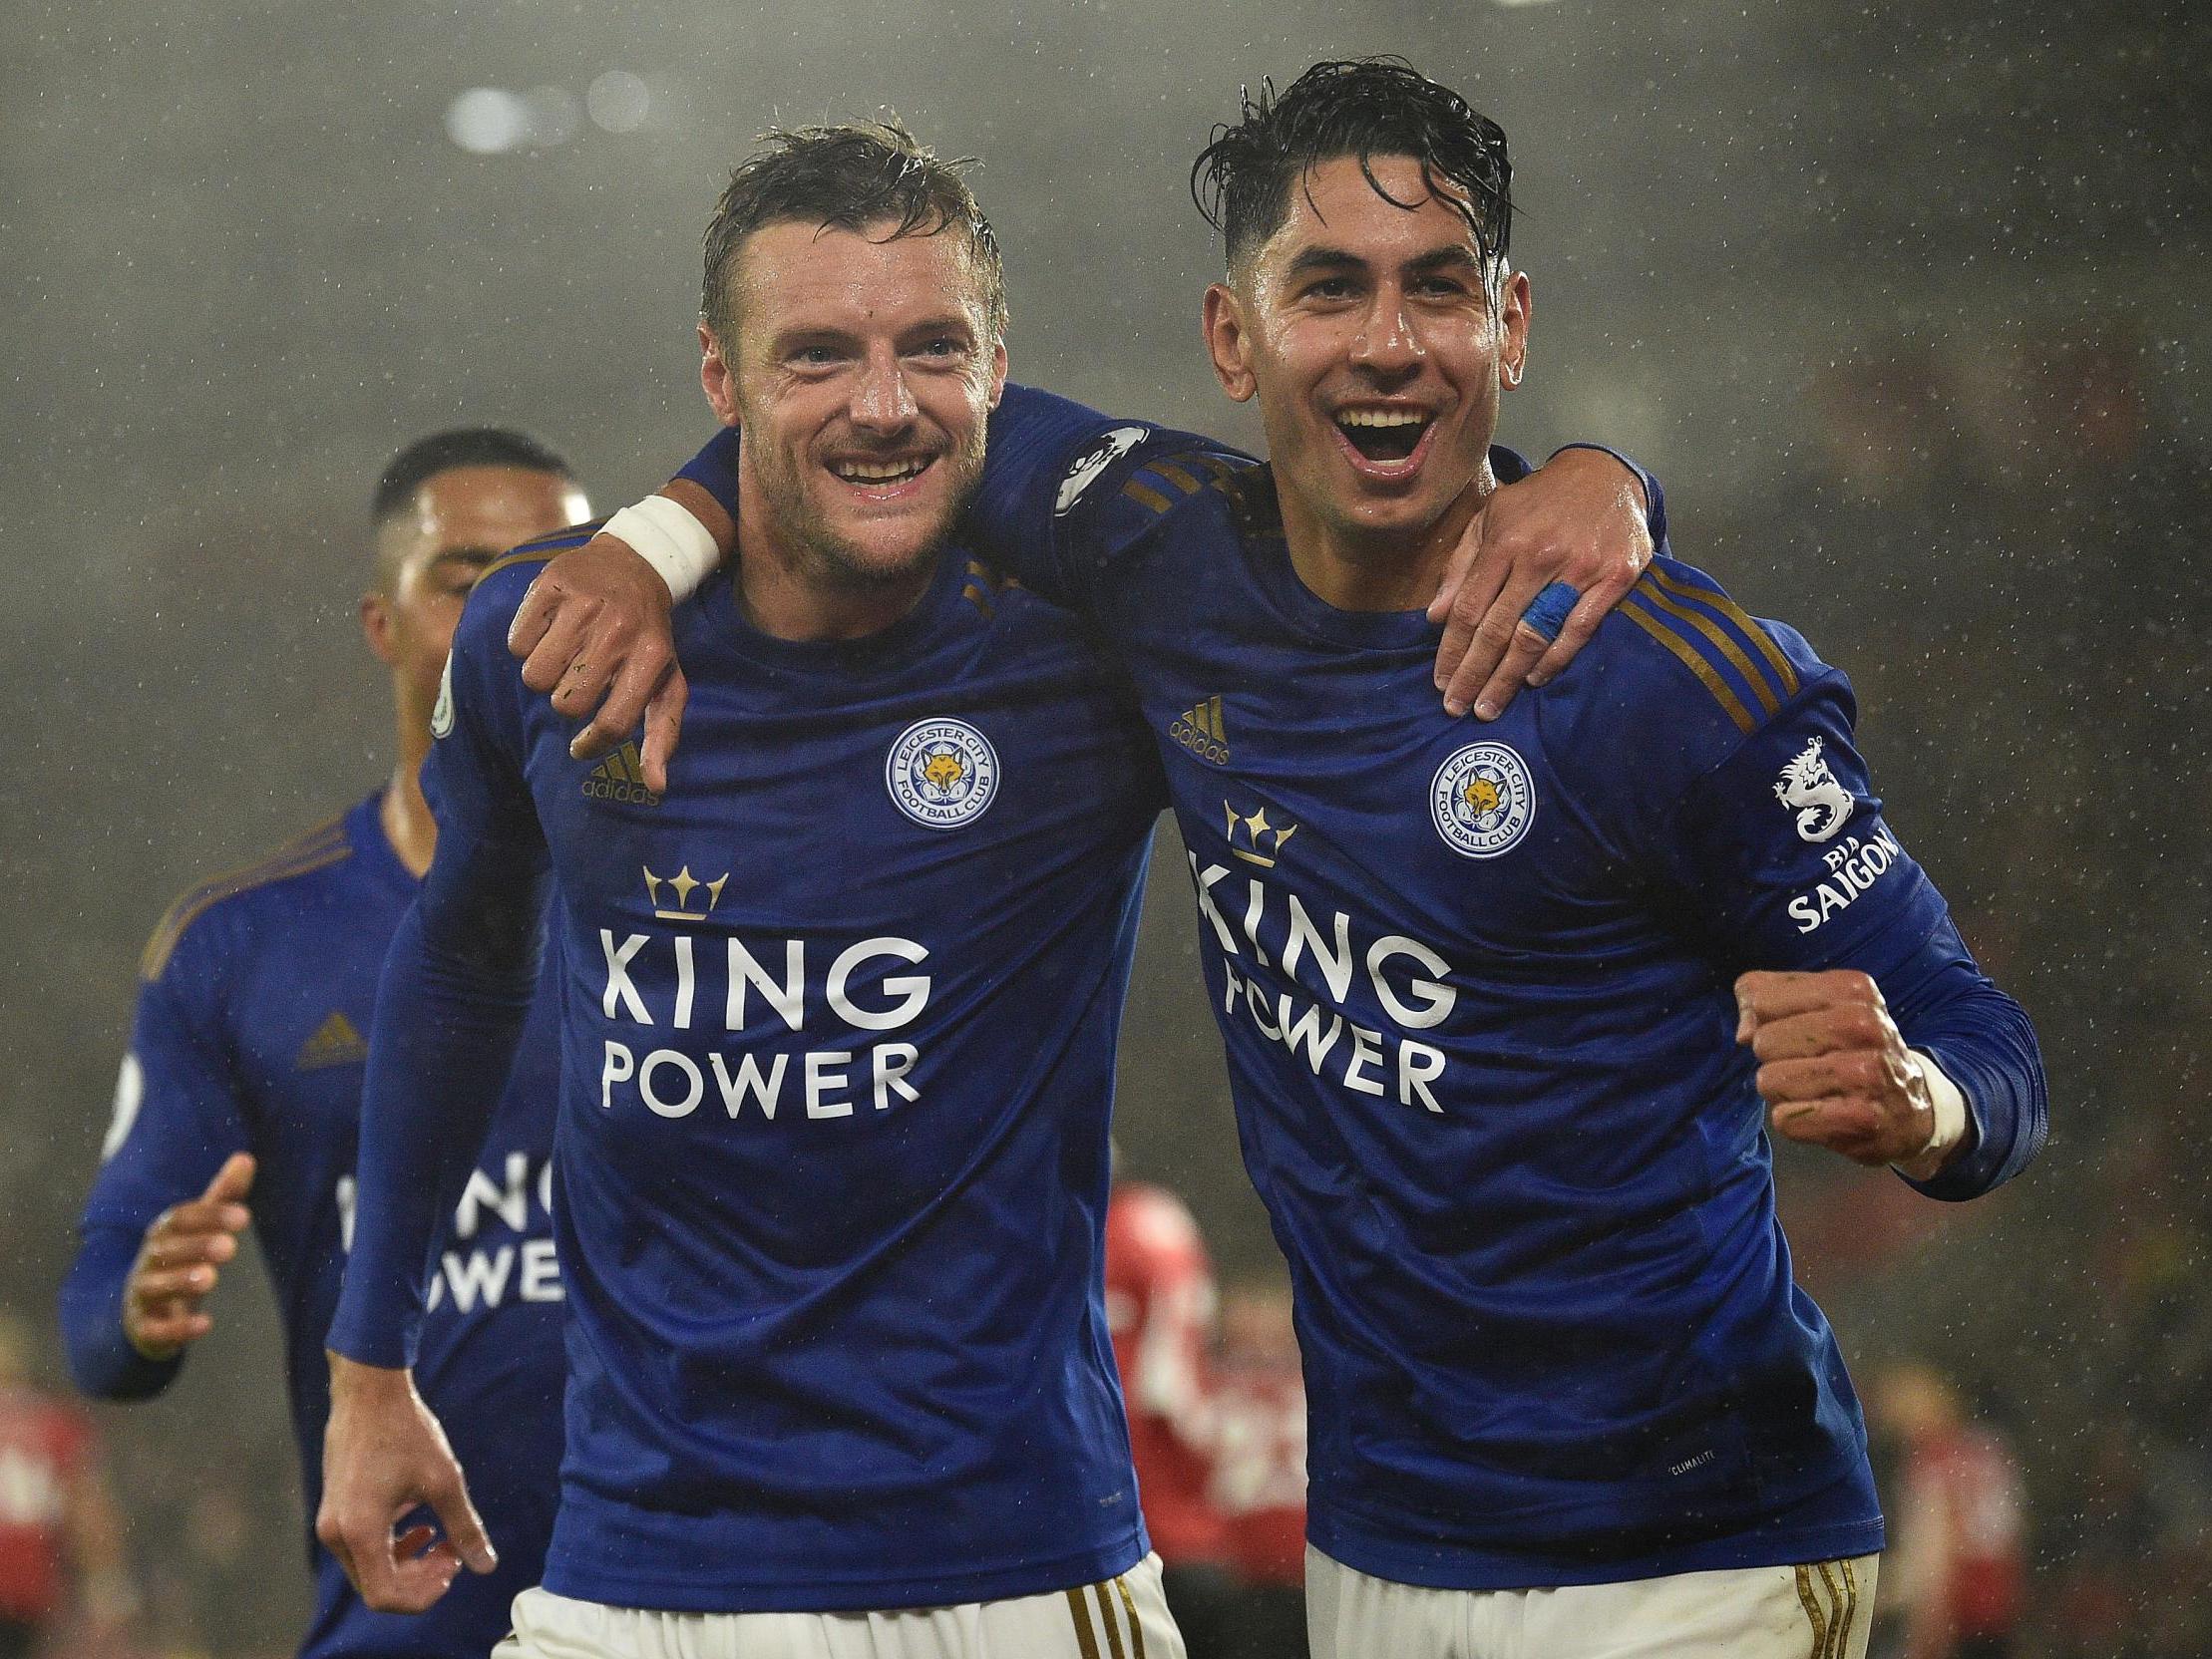 Southampton vs Leicester result: Foxes equal Premier League record win with nine-goal thrashing